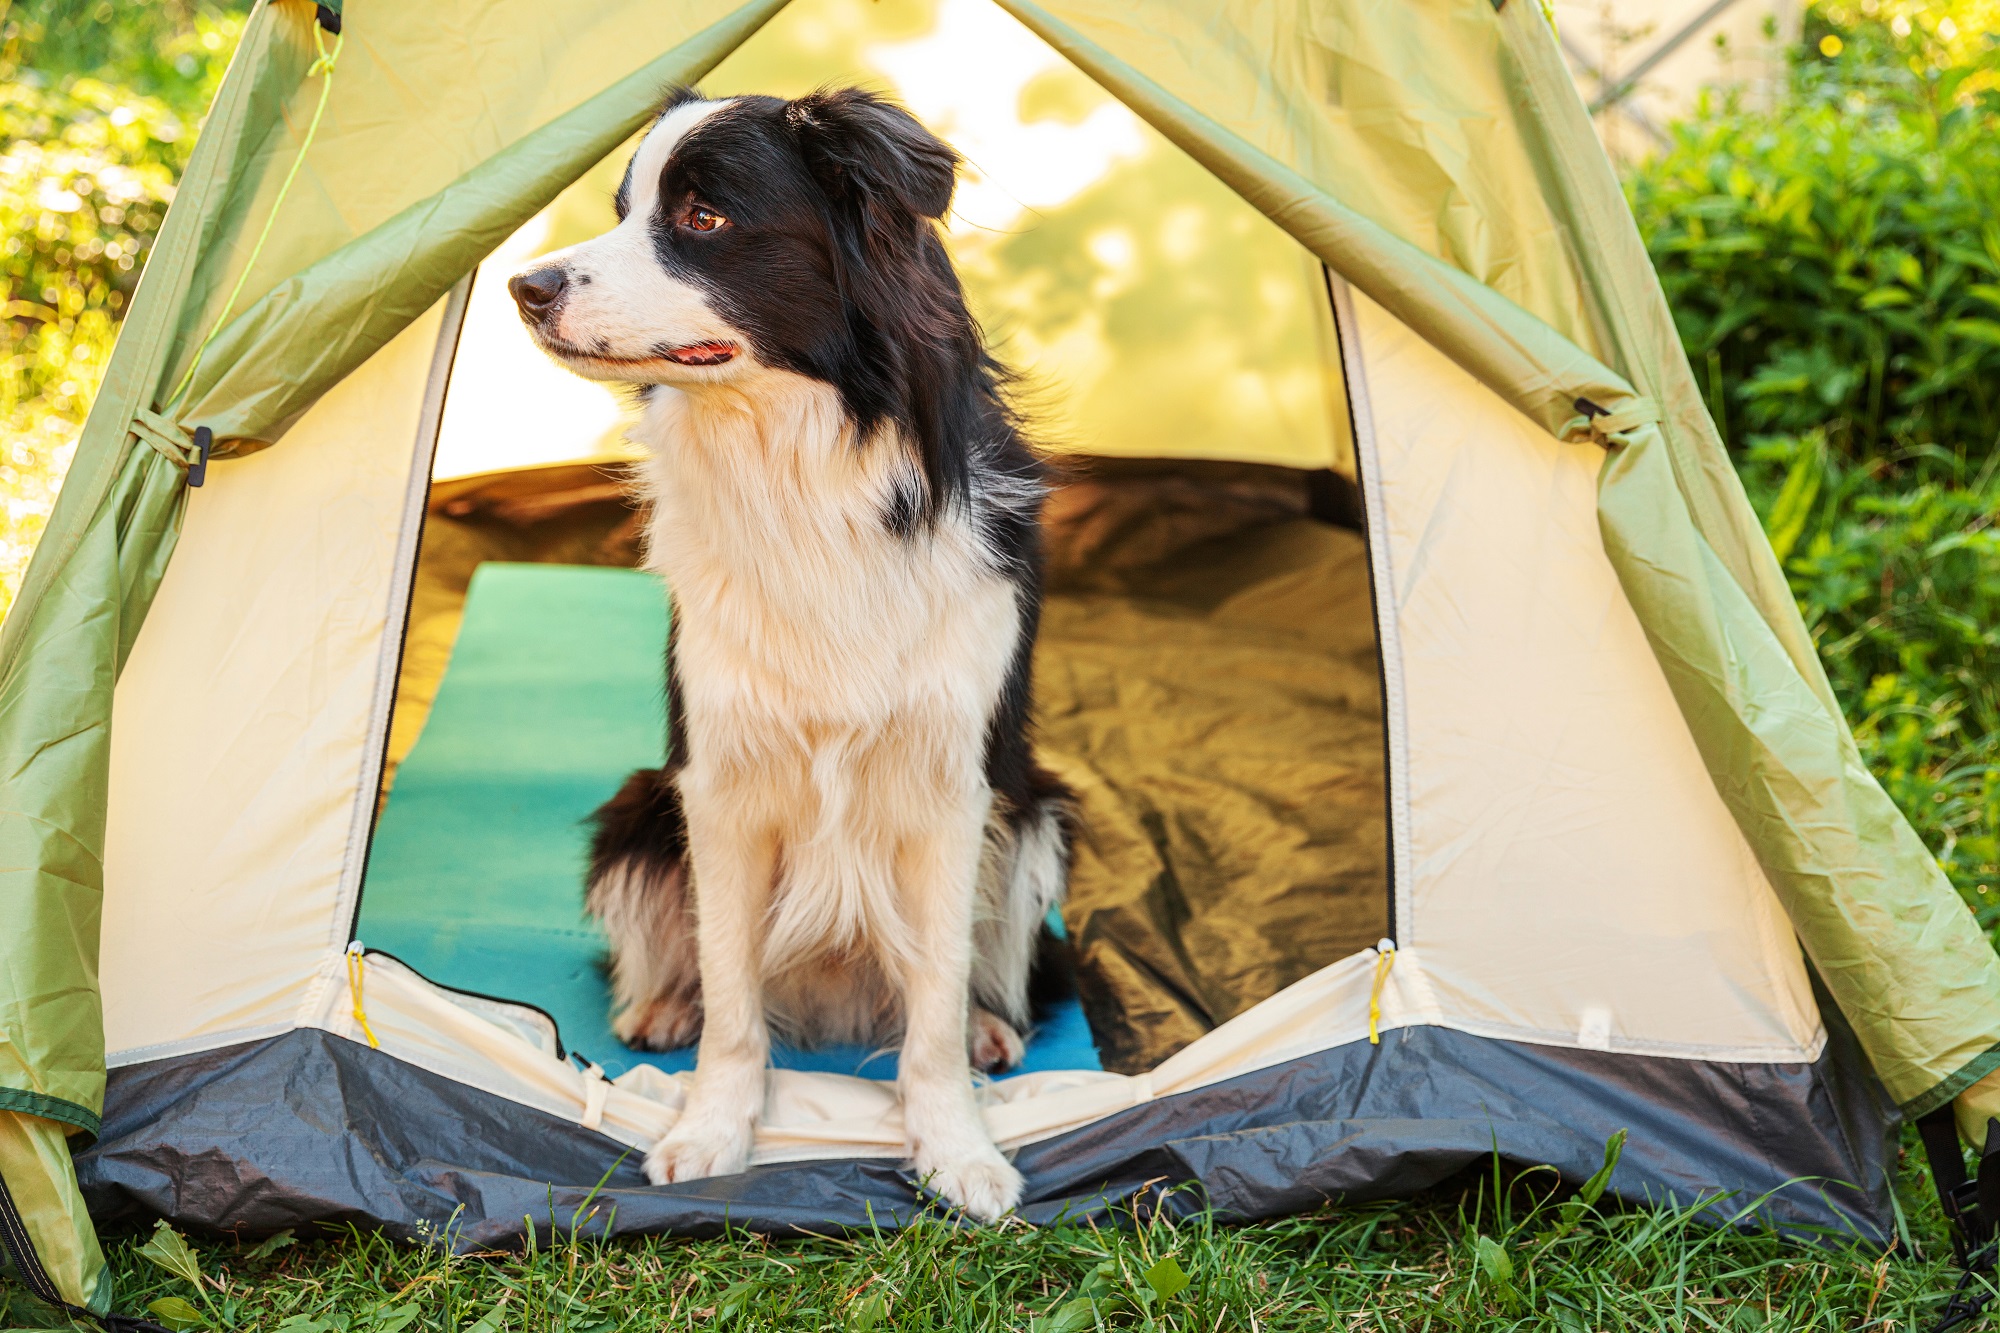 Sheep Dog Politely Asking To Be Let Out of Tent Melts Hearts: 'Head Tilts'